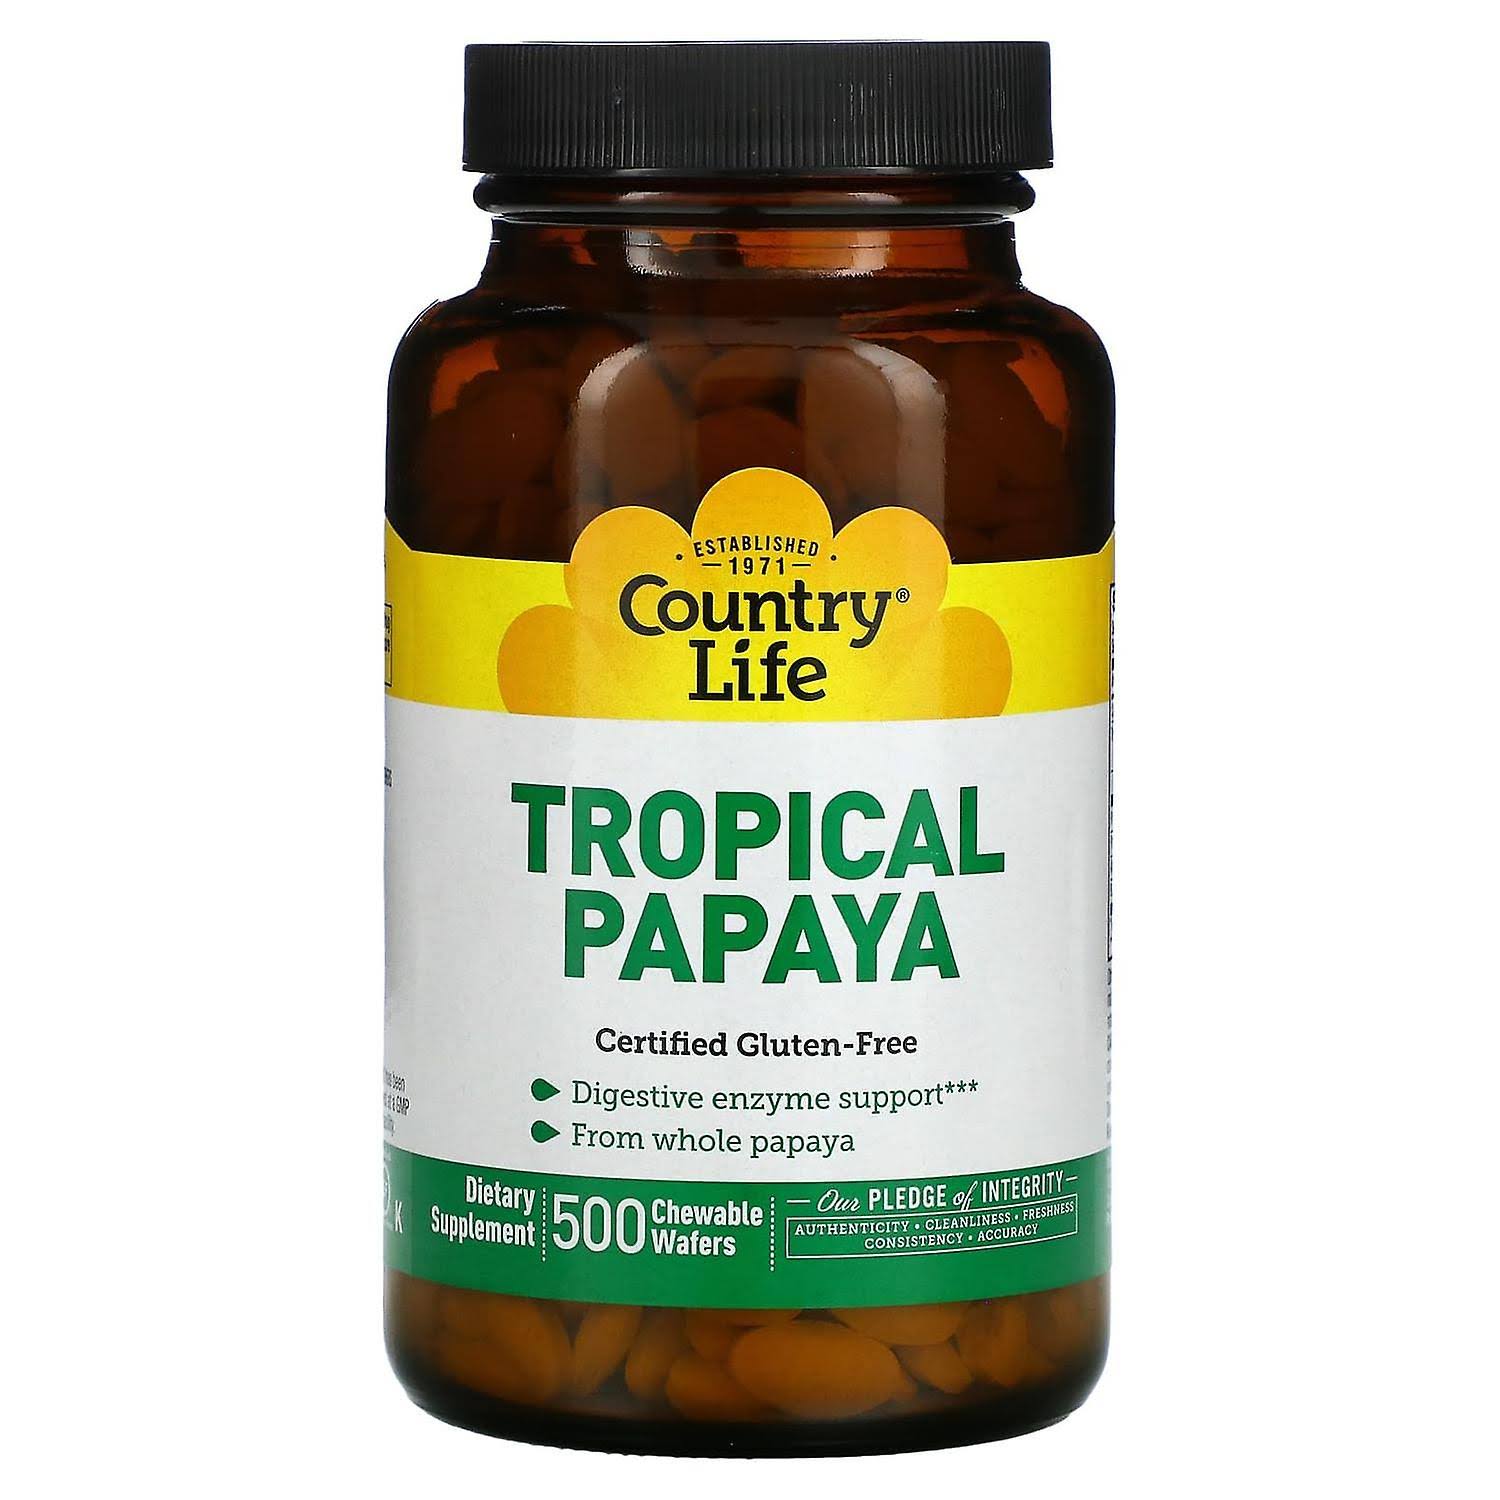 Country Life Natural Tropical Papaya Supplement - 500 Chewable Wafers